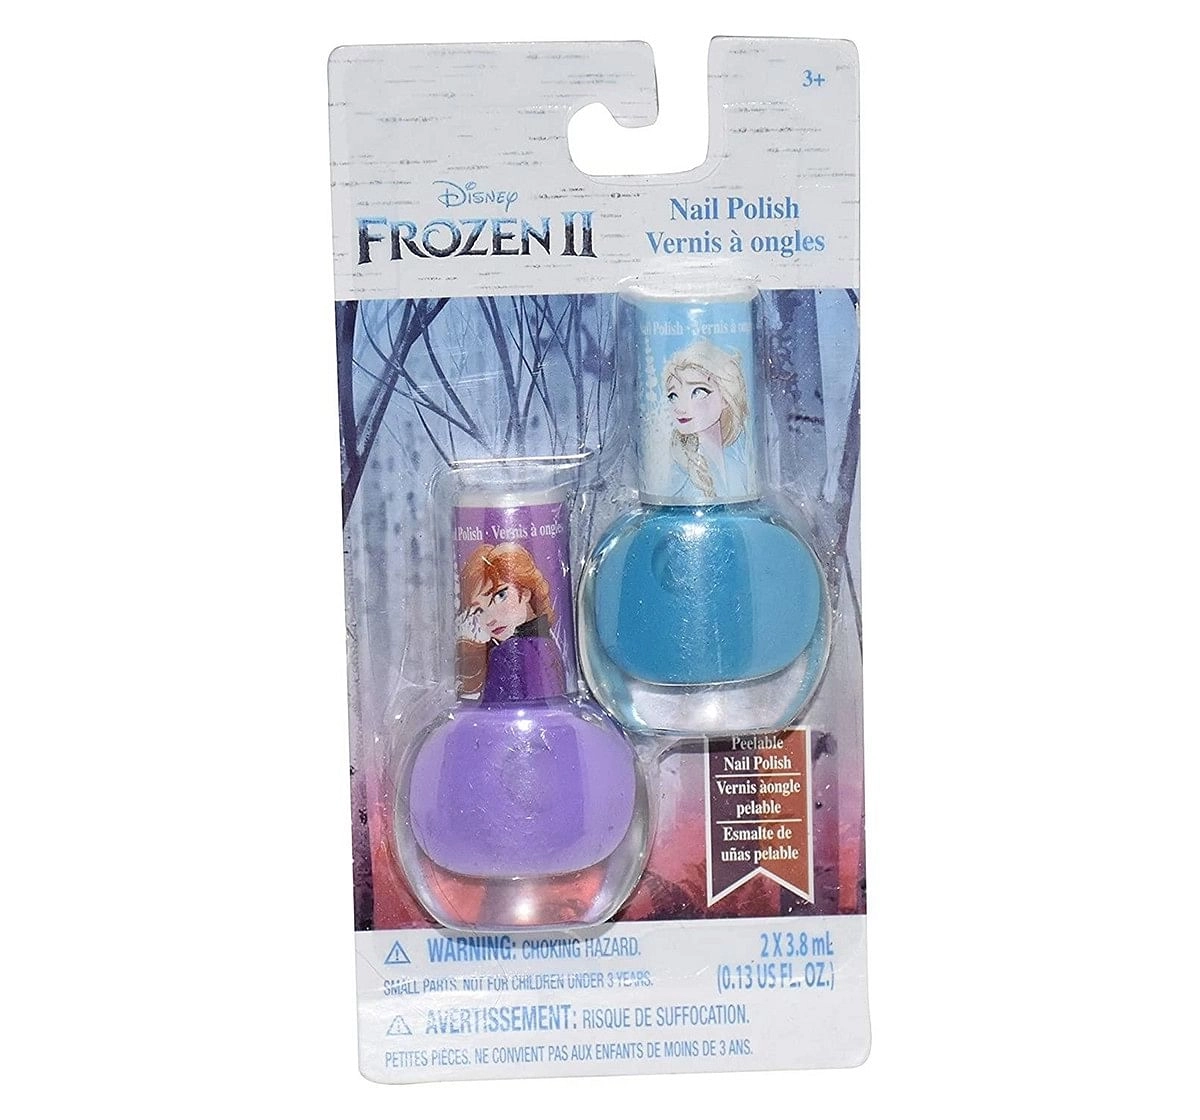 Townley Girl Frozen Ii - 2 Pk Nail Polish Toileteries and Makeup for Kids age 3Y+ 